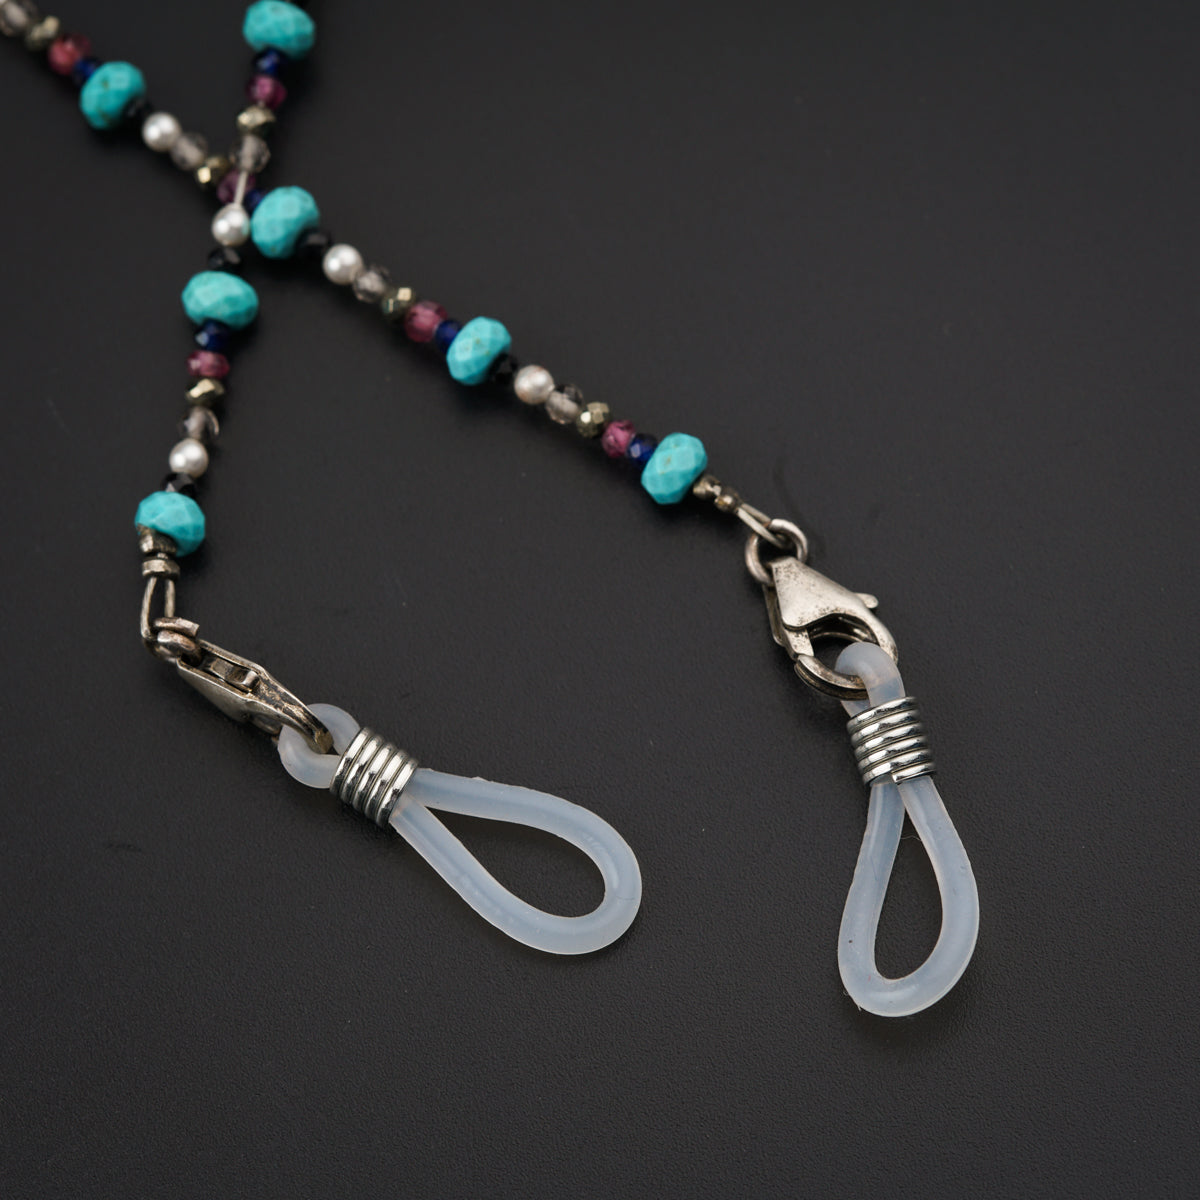 a necklace with beads and a pair of scissors